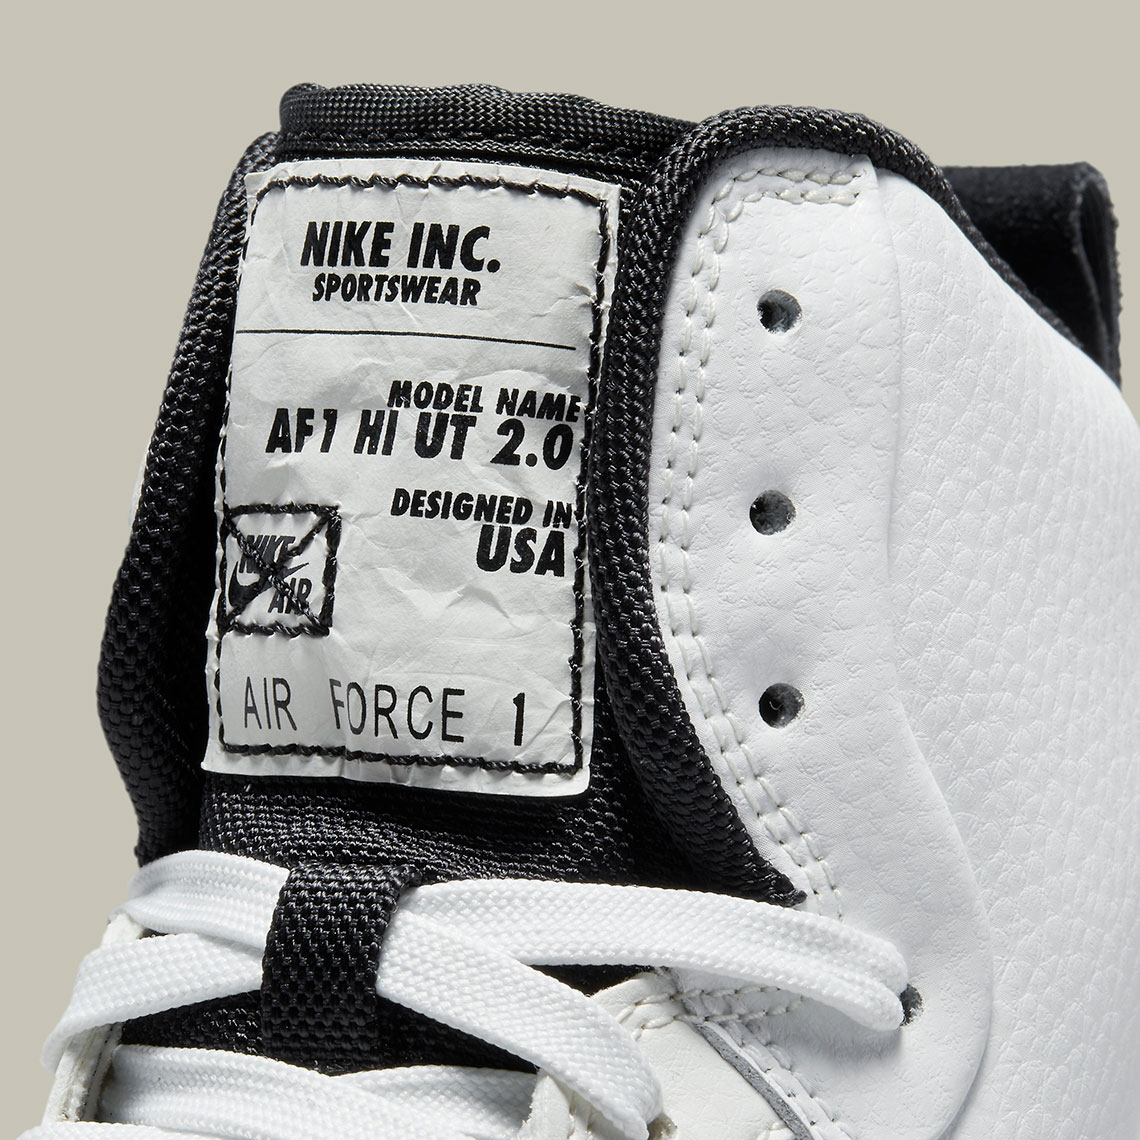 Nike Air Force 1 High Utility 20 Sneakers White